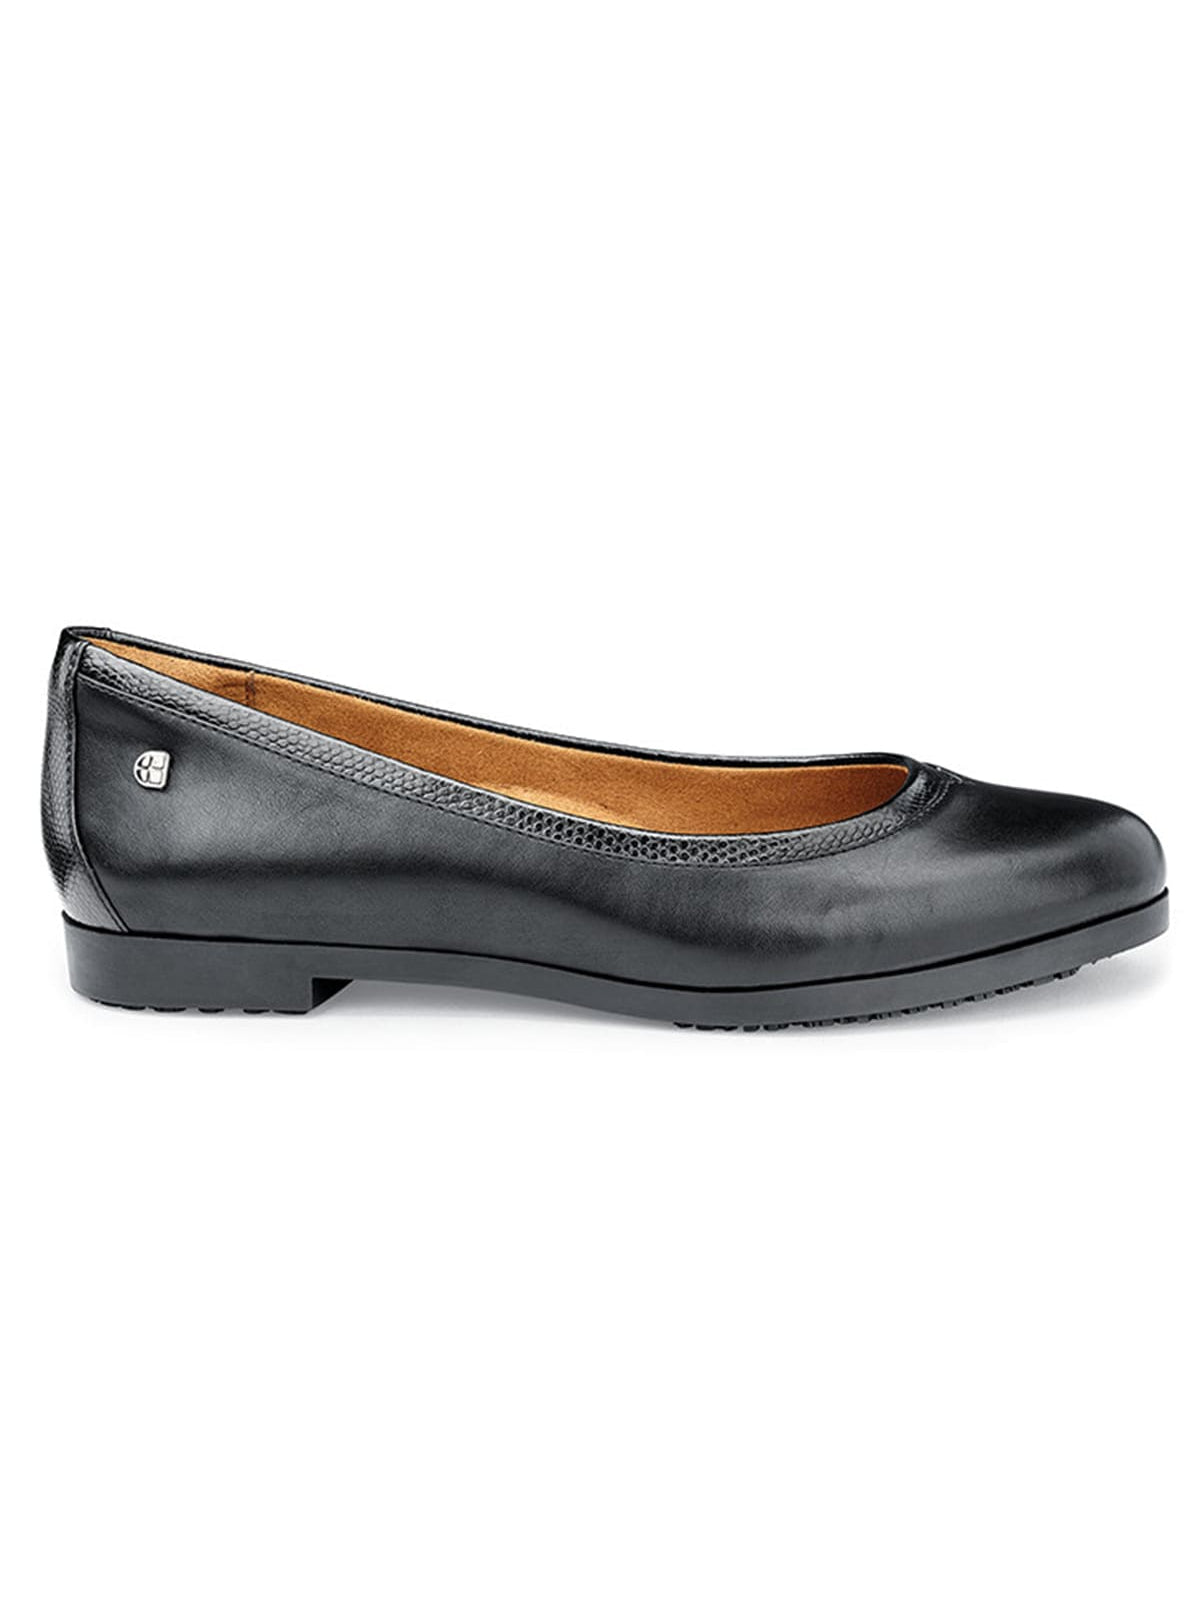 Women's Work Shoe Reese by  Shoes For Crews.